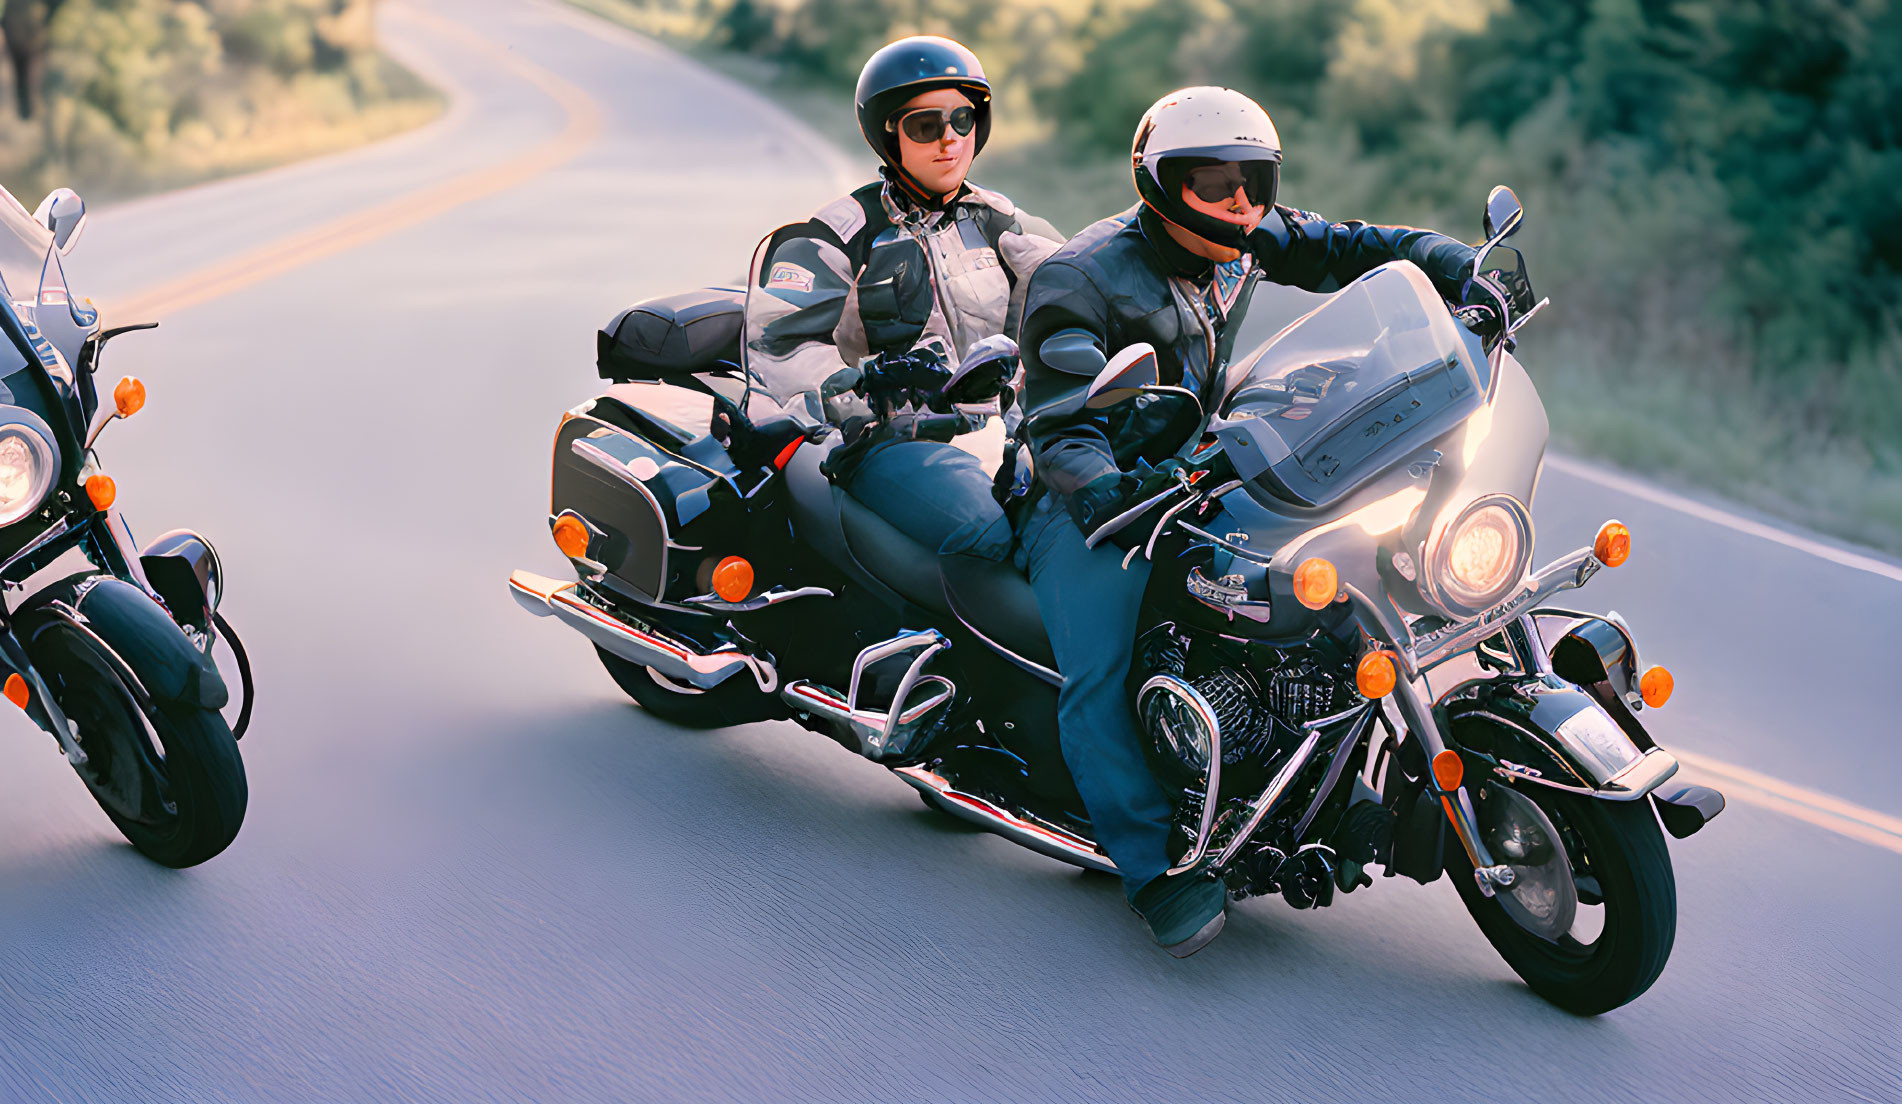 Two motorcyclists on curvy road with helmets and sunglasses, one on touring bike